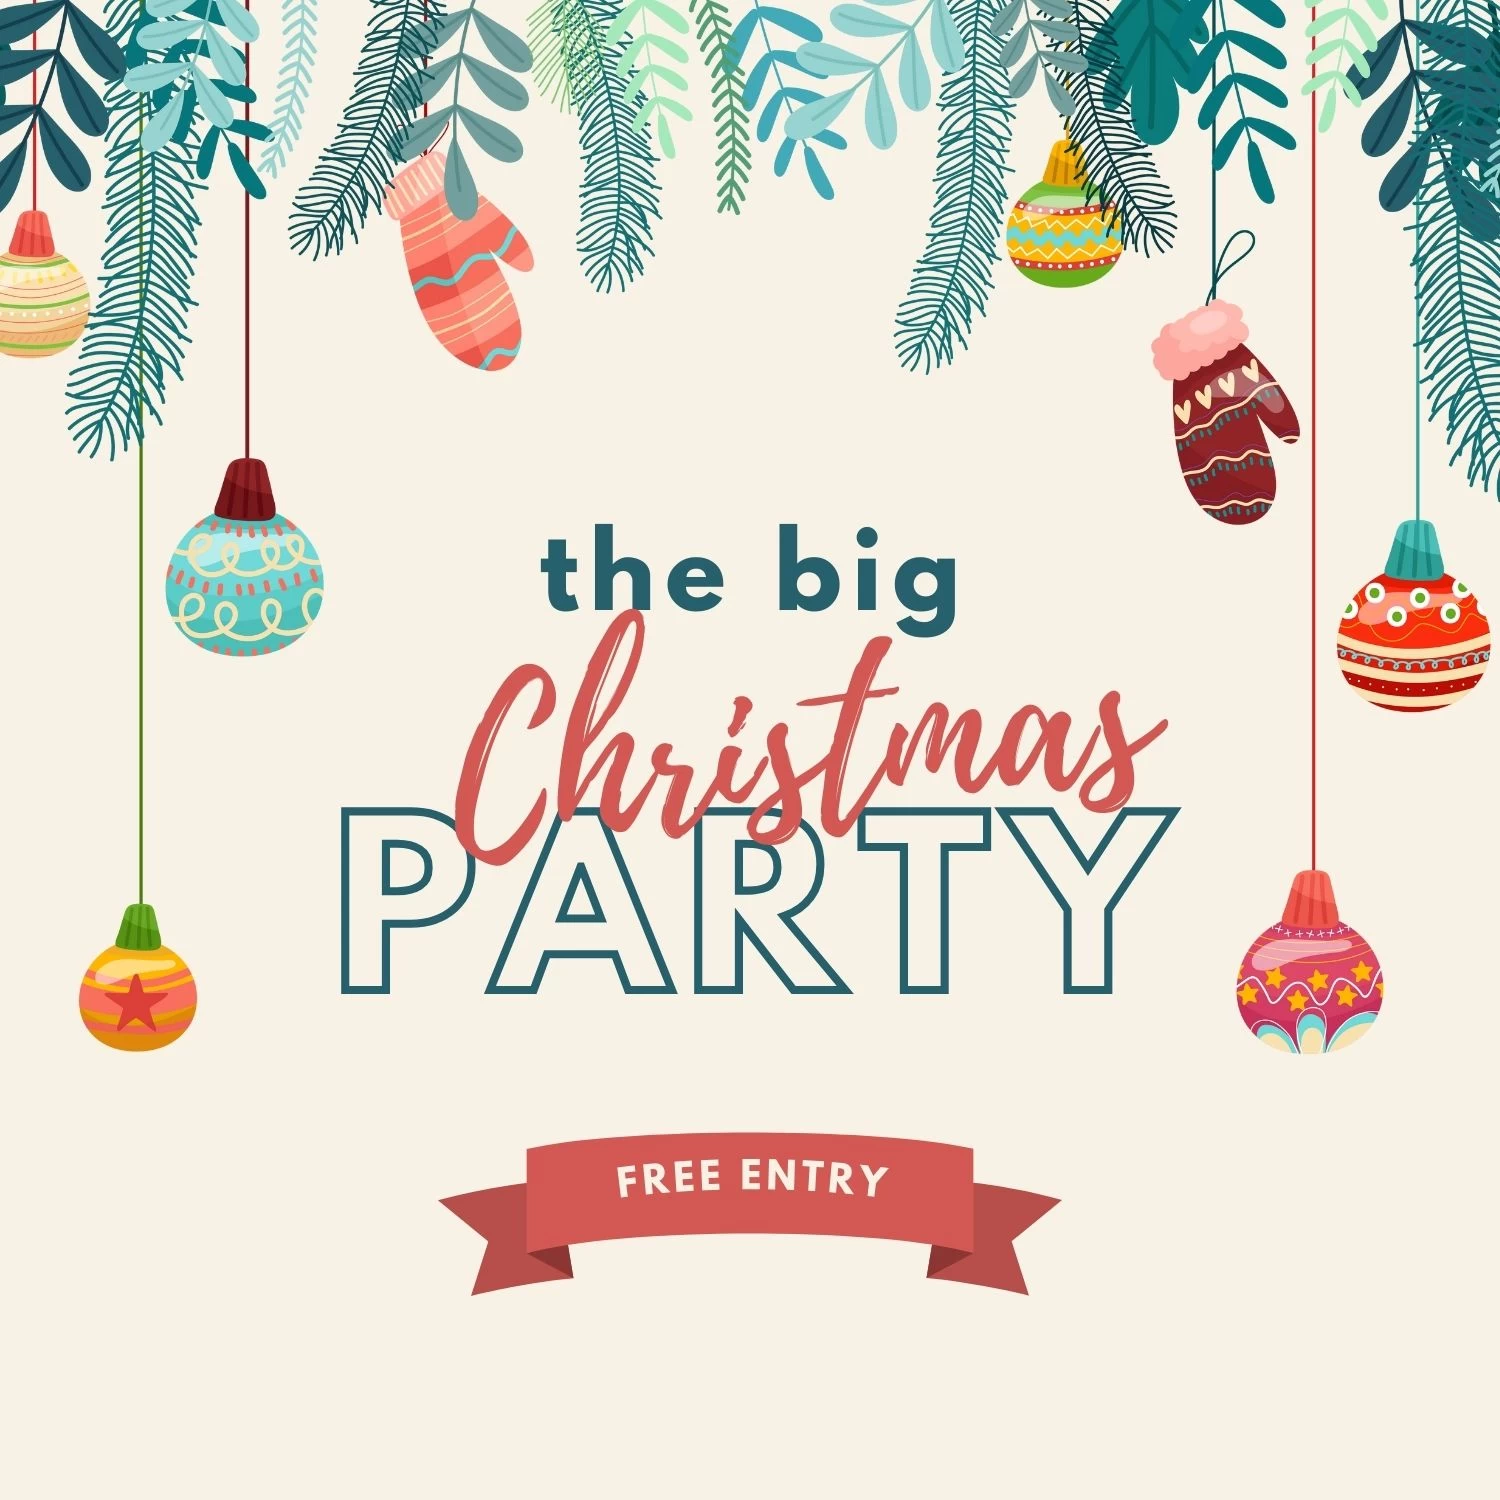 The Big Christmas Party